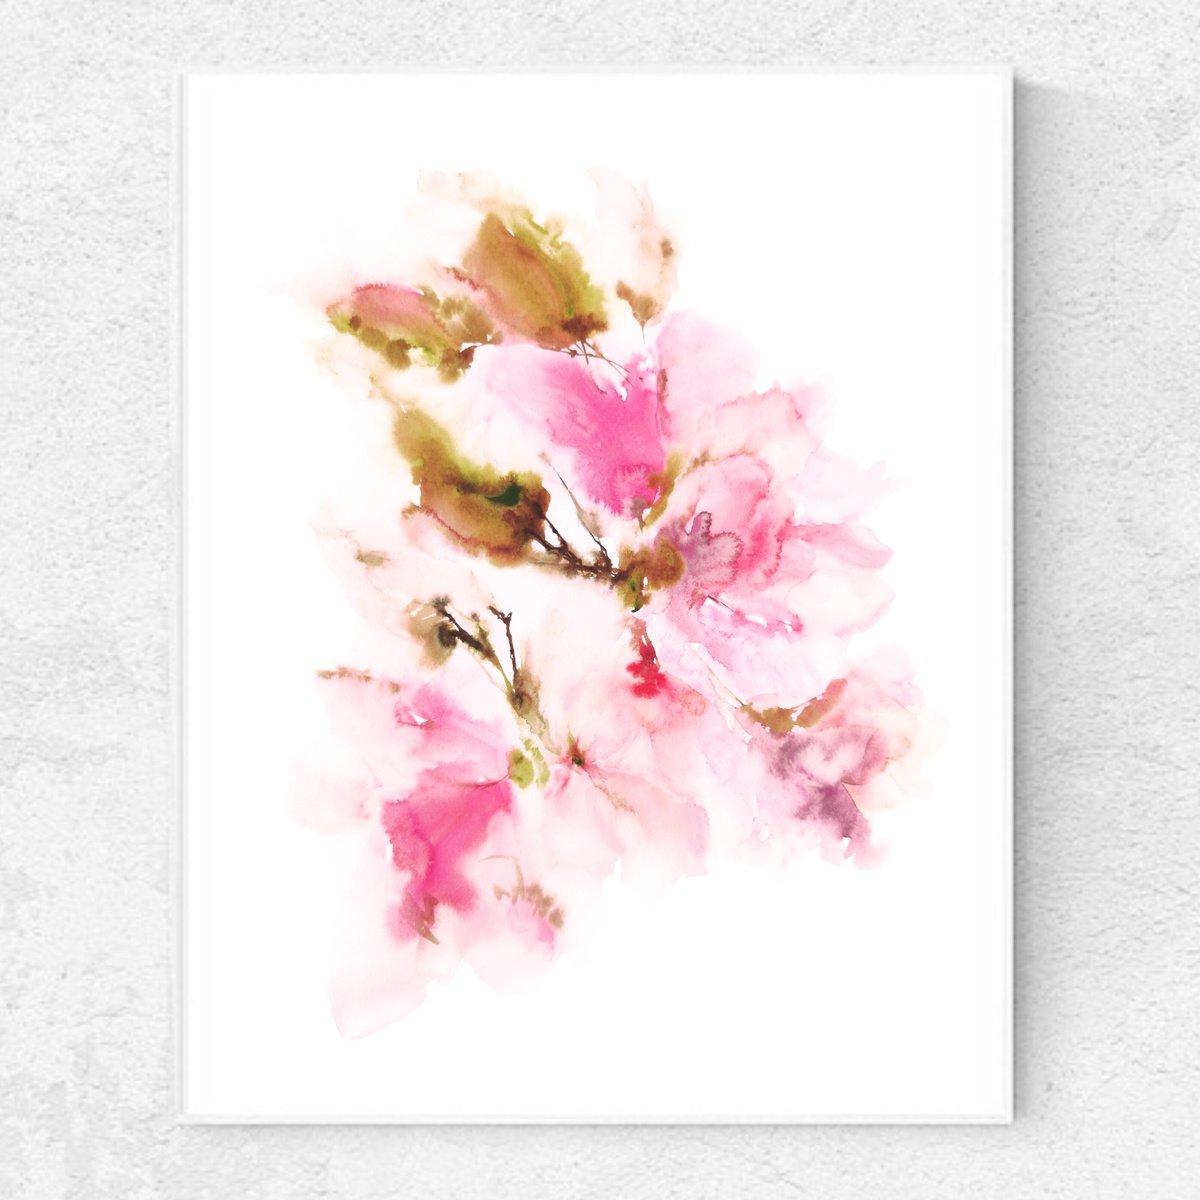 Abstract floral painting, loose flowers Sakura blossom by Olya Grigo